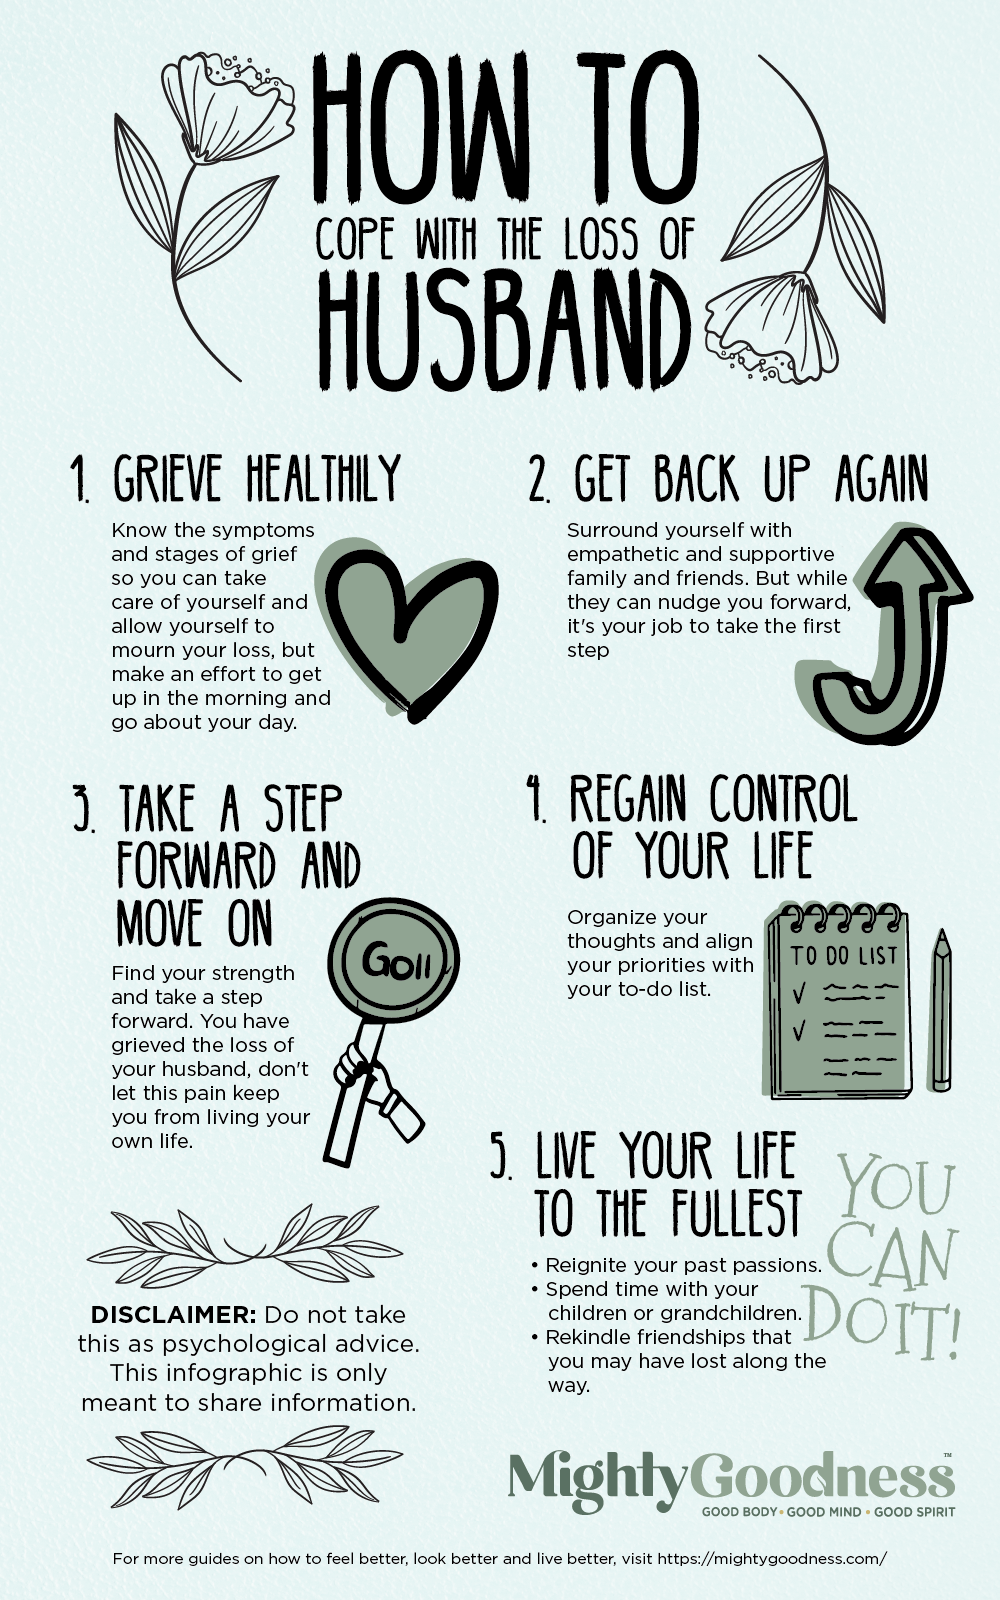 How To Cope with the Loss of Husband